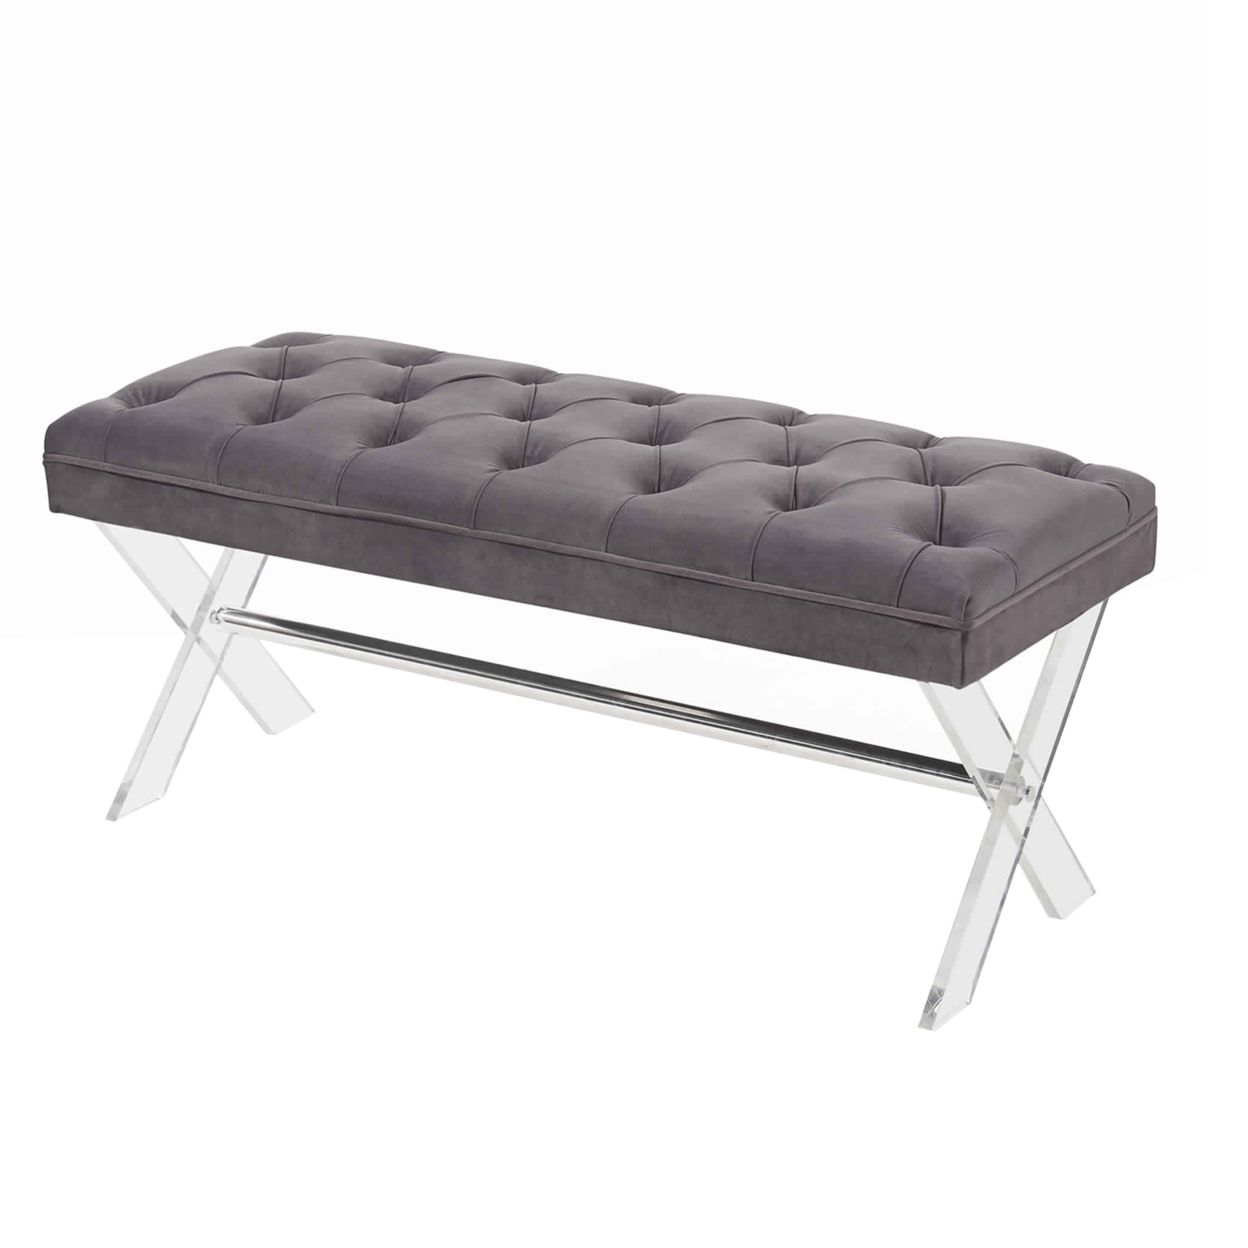 Button Tufted Fabric Ottoman Bench With X Shaped Acrylic Legs, Gray (View 7 of 10)